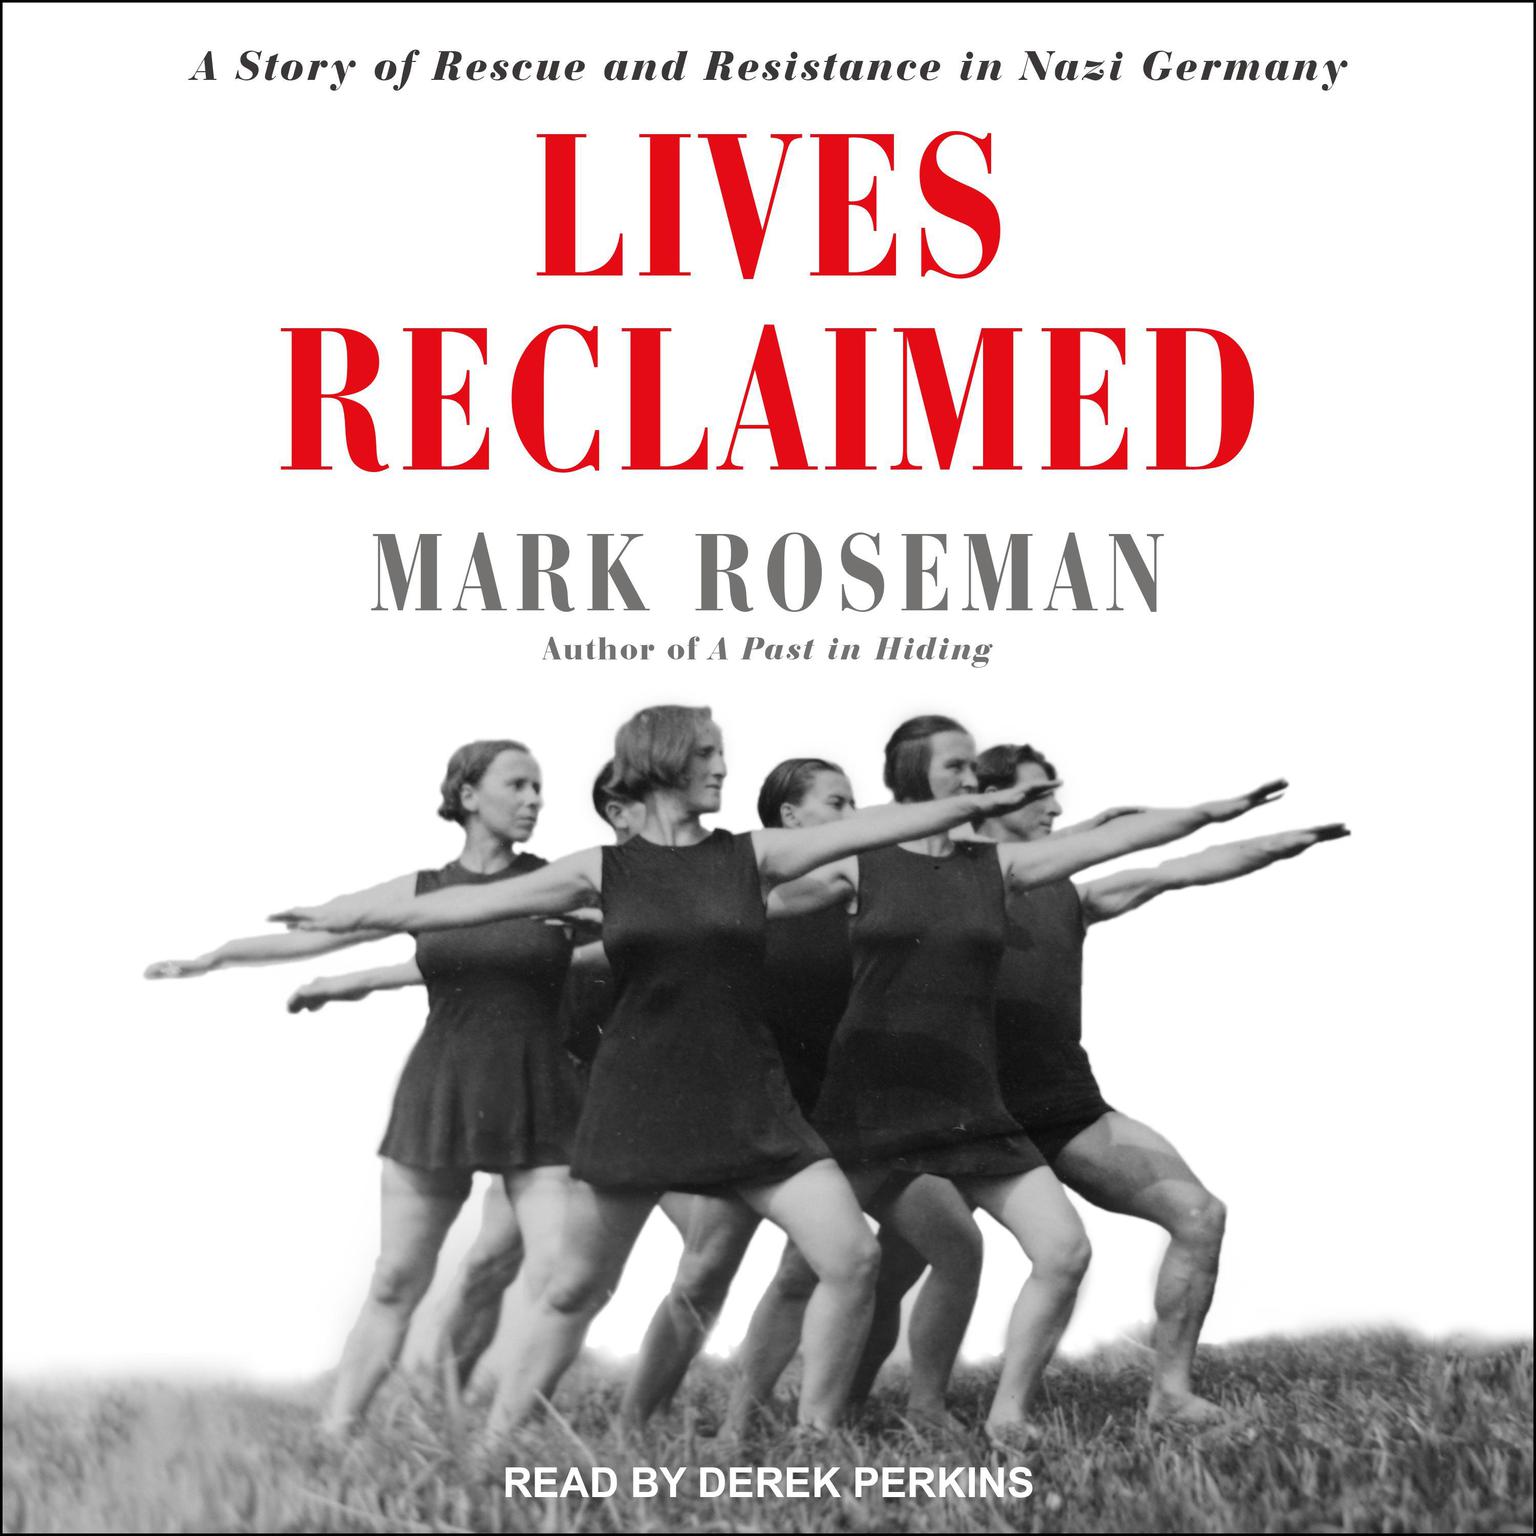 Lives Reclaimed: A Story of Rescue and Resistance in Nazi Germany Audiobook, by Mark Roseman